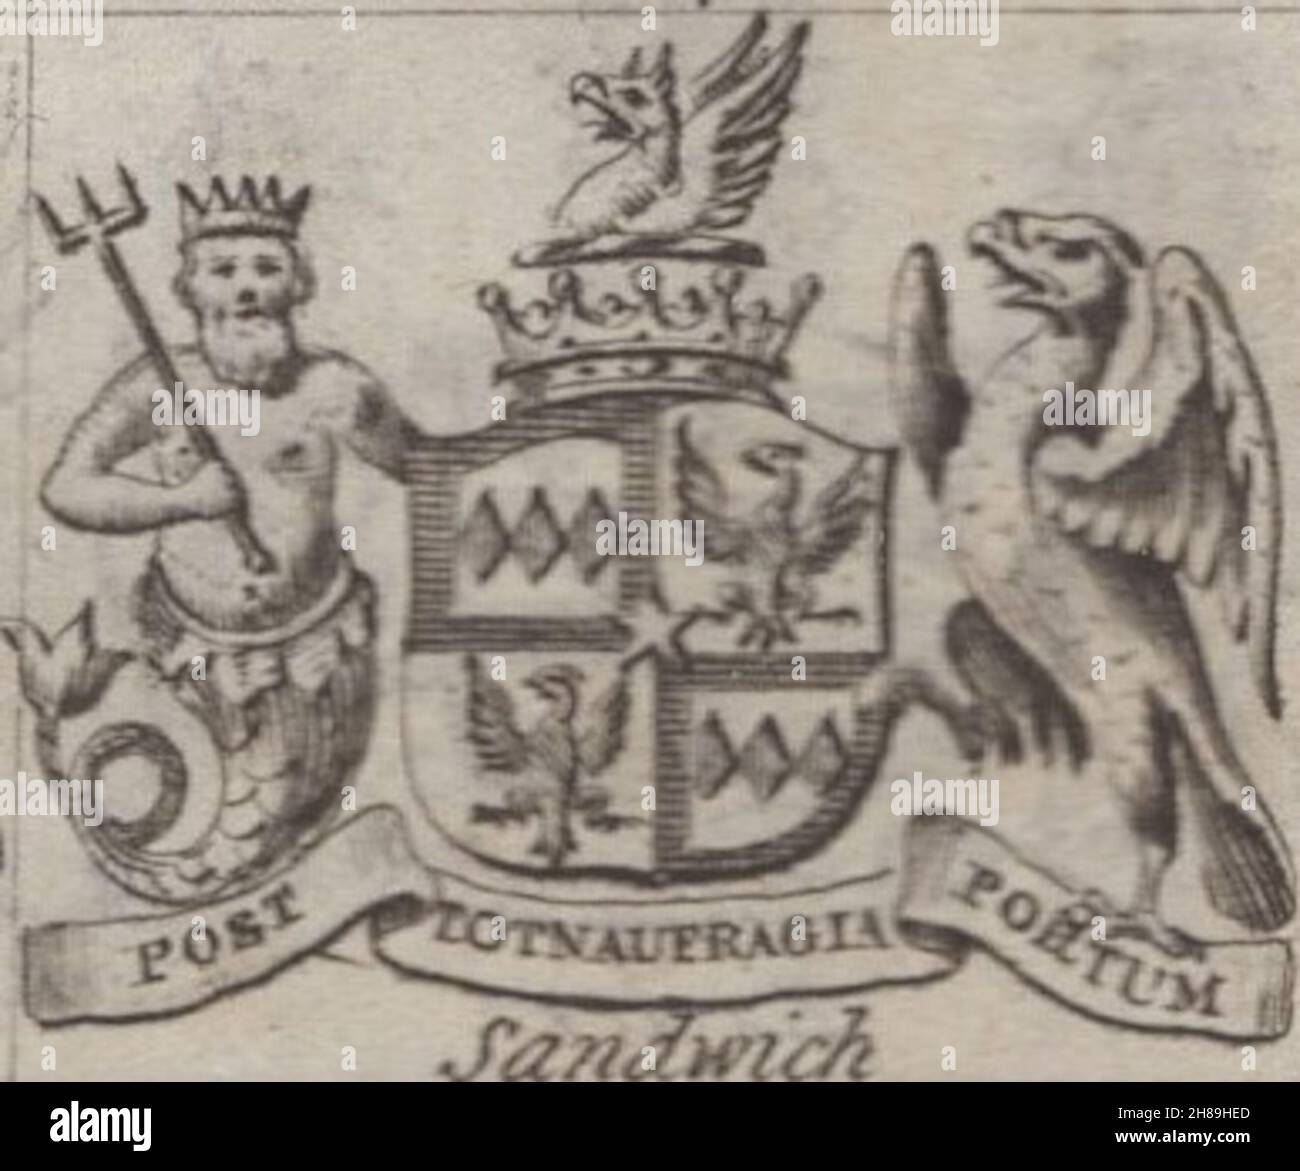 antique 18th century engraving heraldy coats of arms, English Earls , Motto / slogan: Post tot naufragia portum. Sandwich. by Woodman & Mutlow fc russel co circa 1780s Source: original engravings from  the annual almanach book. Stock Photo